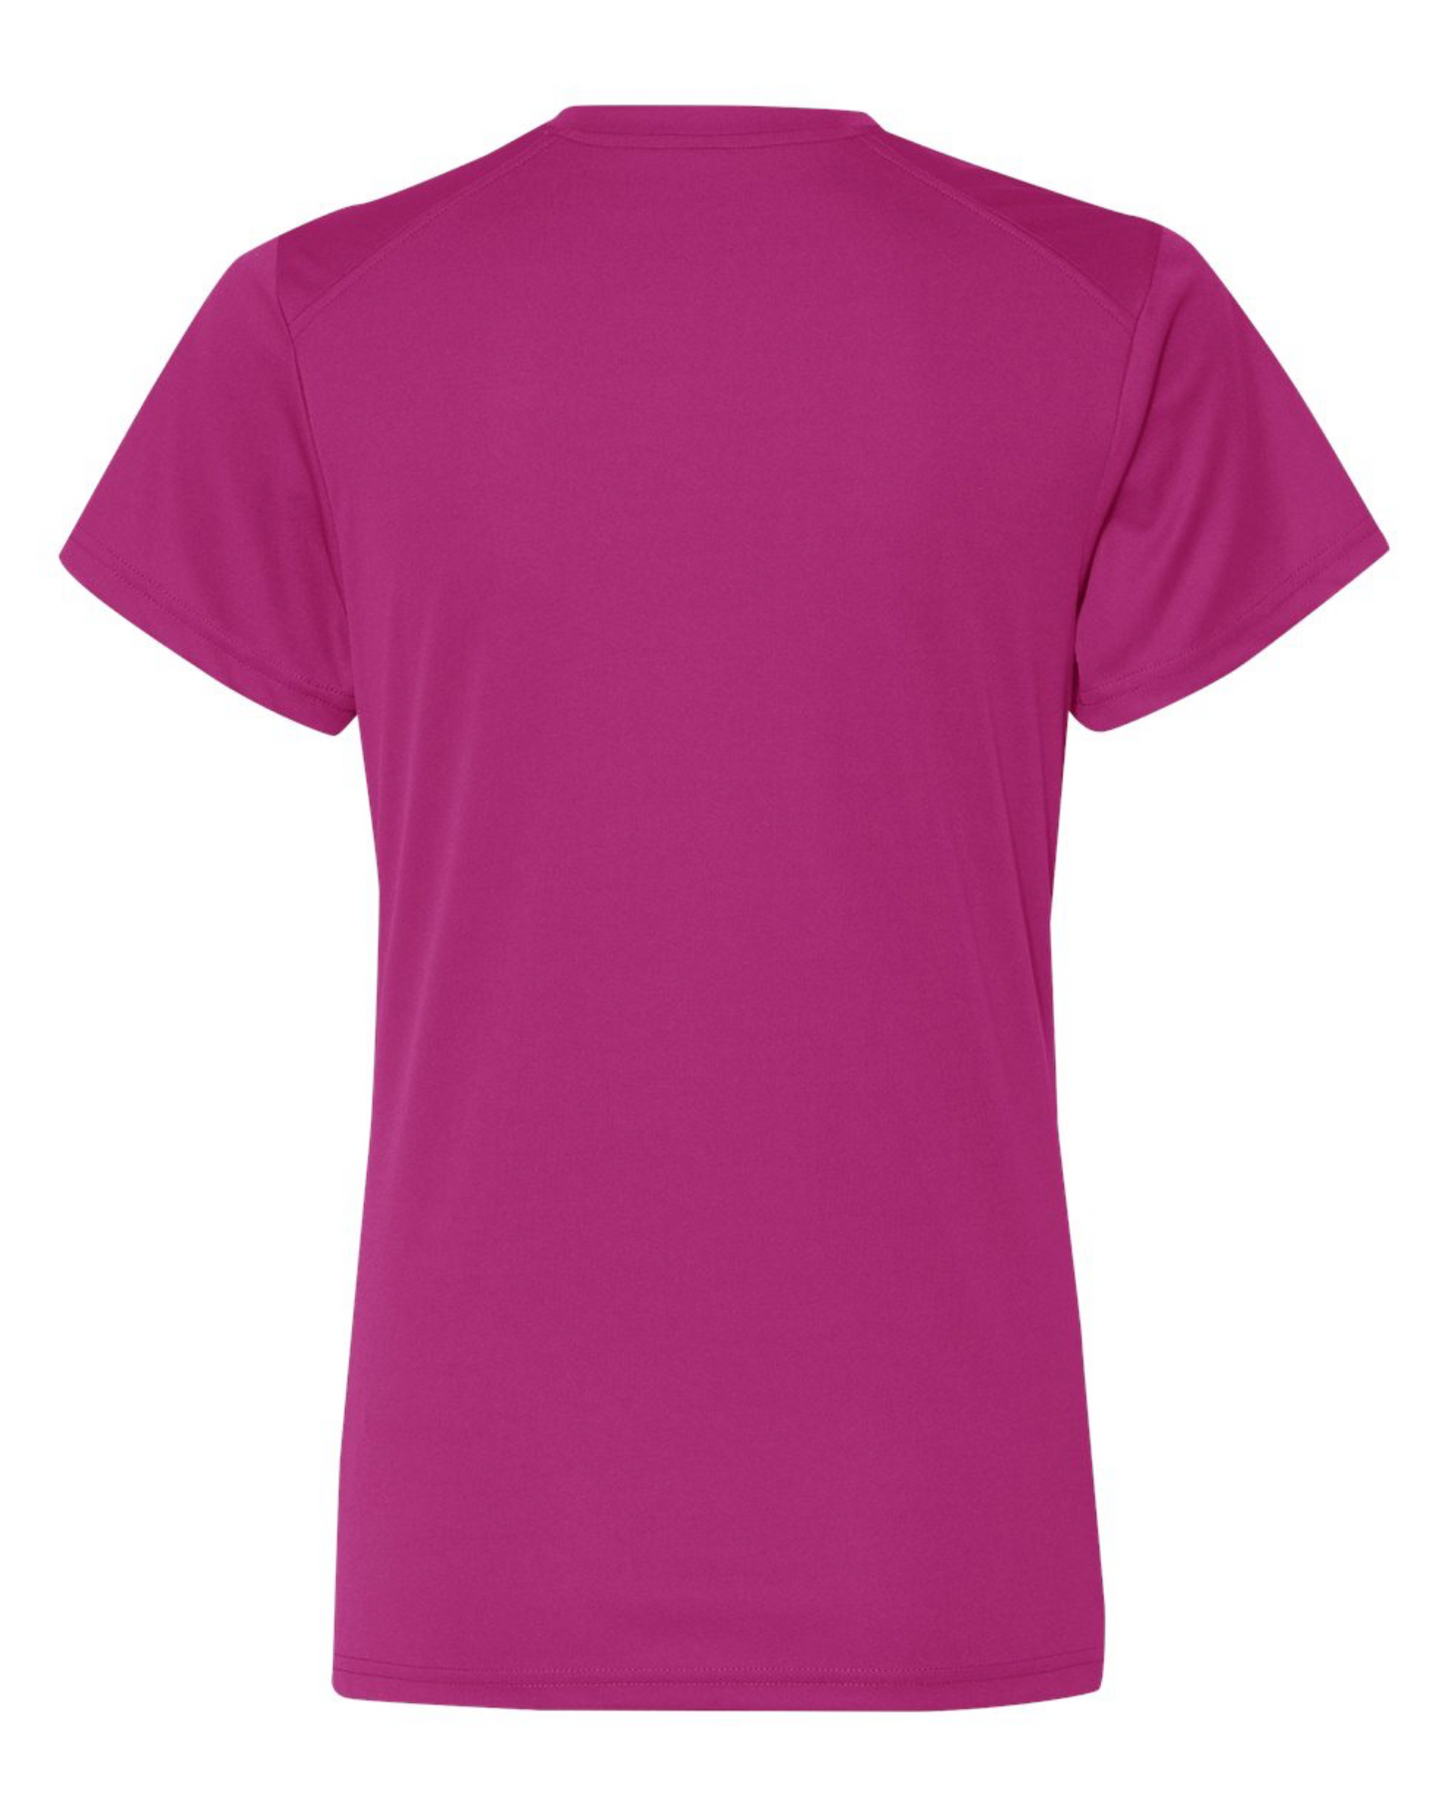 Women's V-Neck Activewear: Eye Am (Pink Camo Patch)